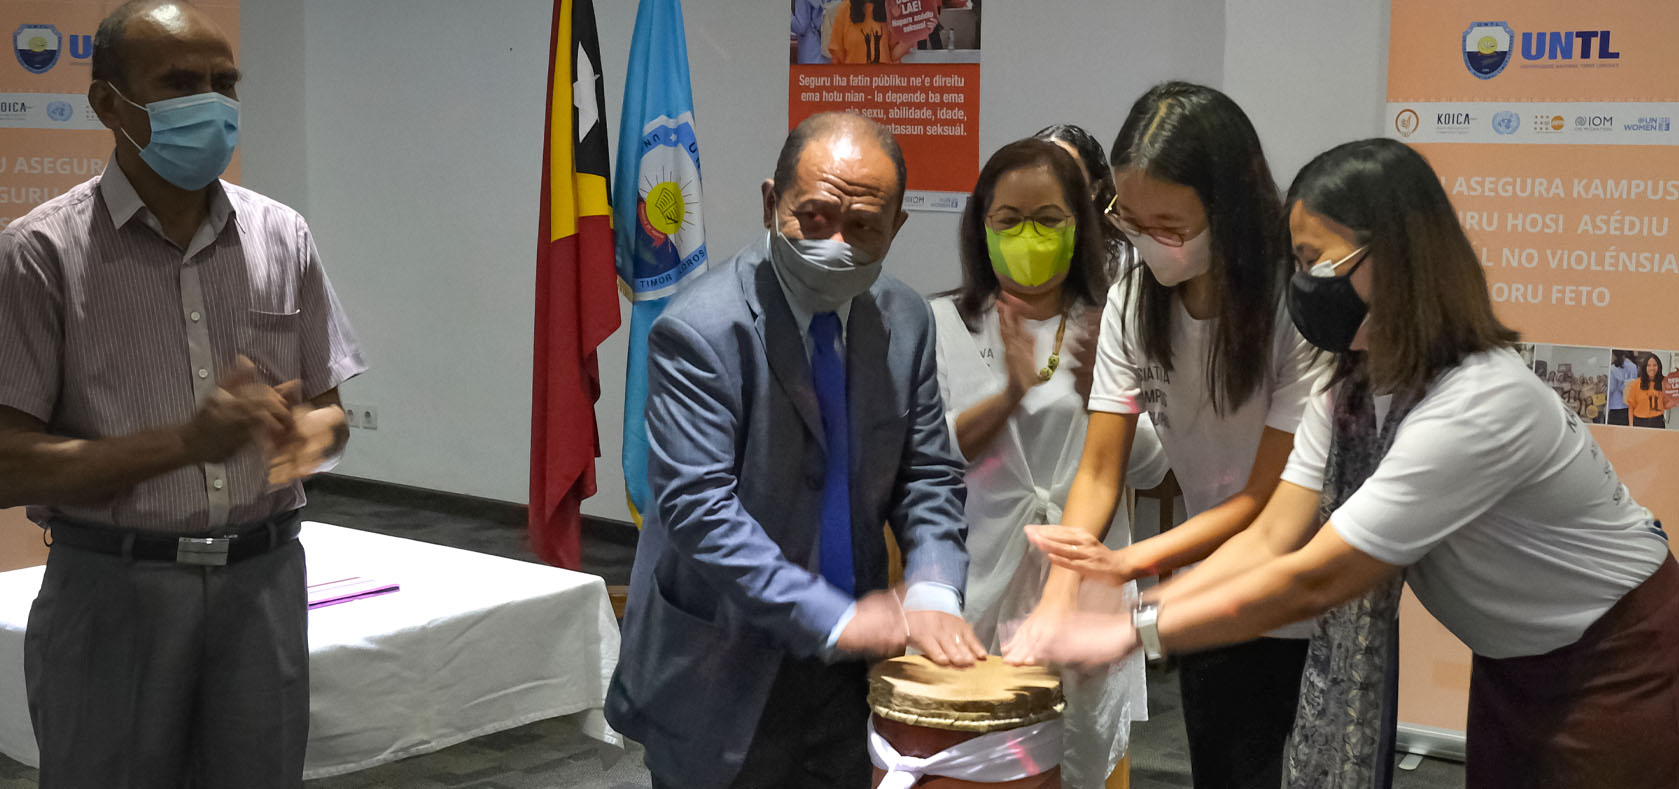 (From left) UNTL Rector Prof. Dr. João Soares Martins, KOICA Country Director Eunju Cha, and UN Women Together for Equality Programme Manager Nuntana Tangwinit do a traditional drum-beating ceremony to launch the Safe Campus Initiative technical working group. The launch took place at Hotel Timor in Dili on 14 October 2021. Photo: UN Women/ Sylvio da Fonseca